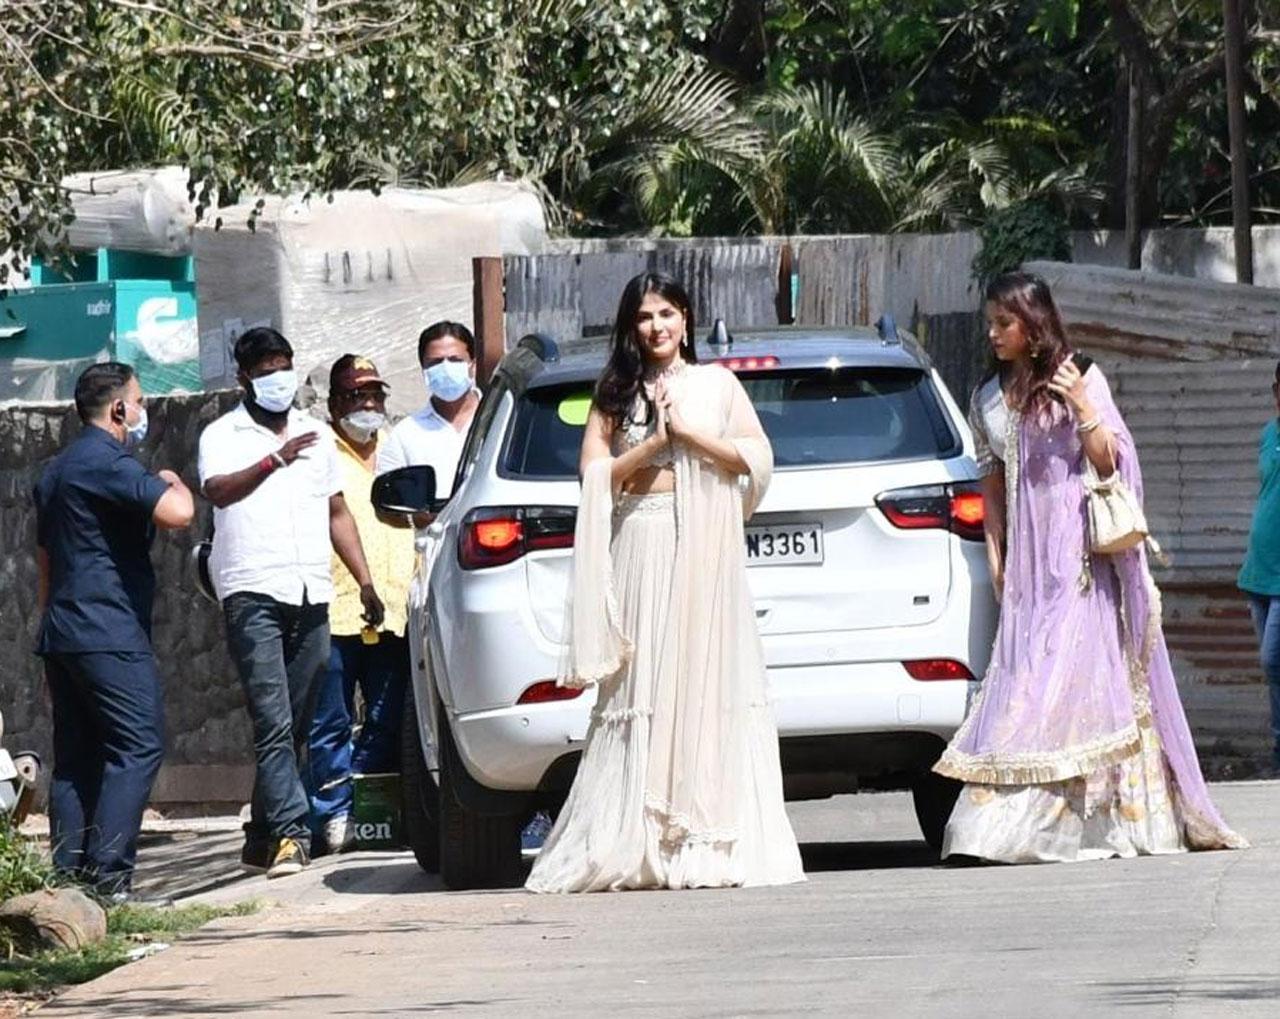 Rhea Chakraborty is a close friend of the bride-to-be Shibani Dandekar. We spotted her at the Mehendi ceremony and now she has arrived for the wedding too. She waved at the paparazzi and looked ethereal in her lehenga.